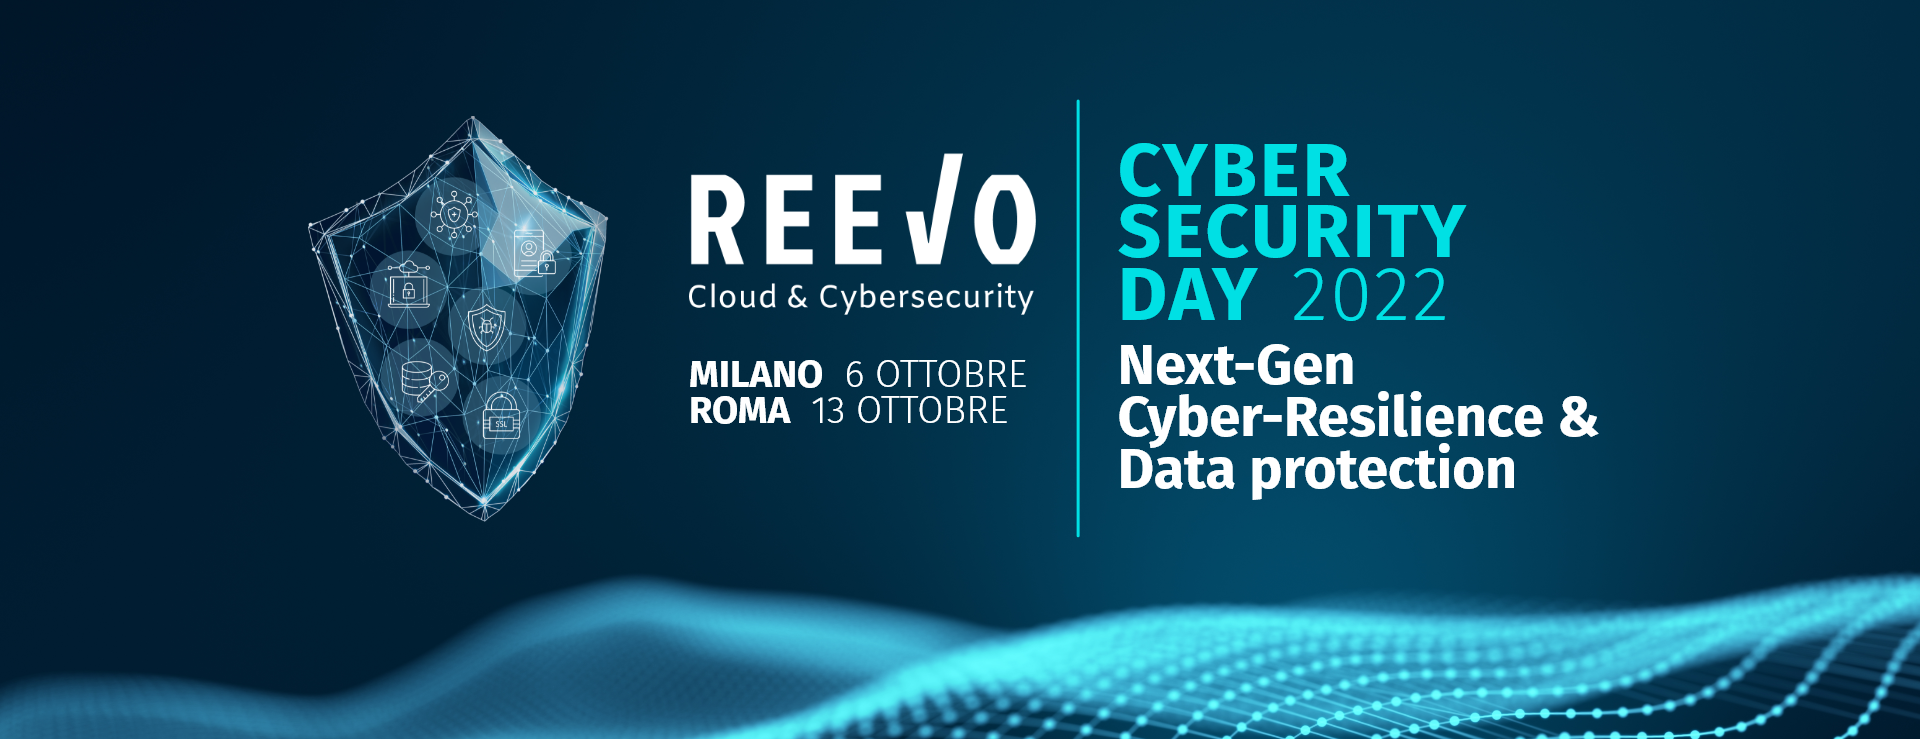 Reevo Cyber Security Day 2022